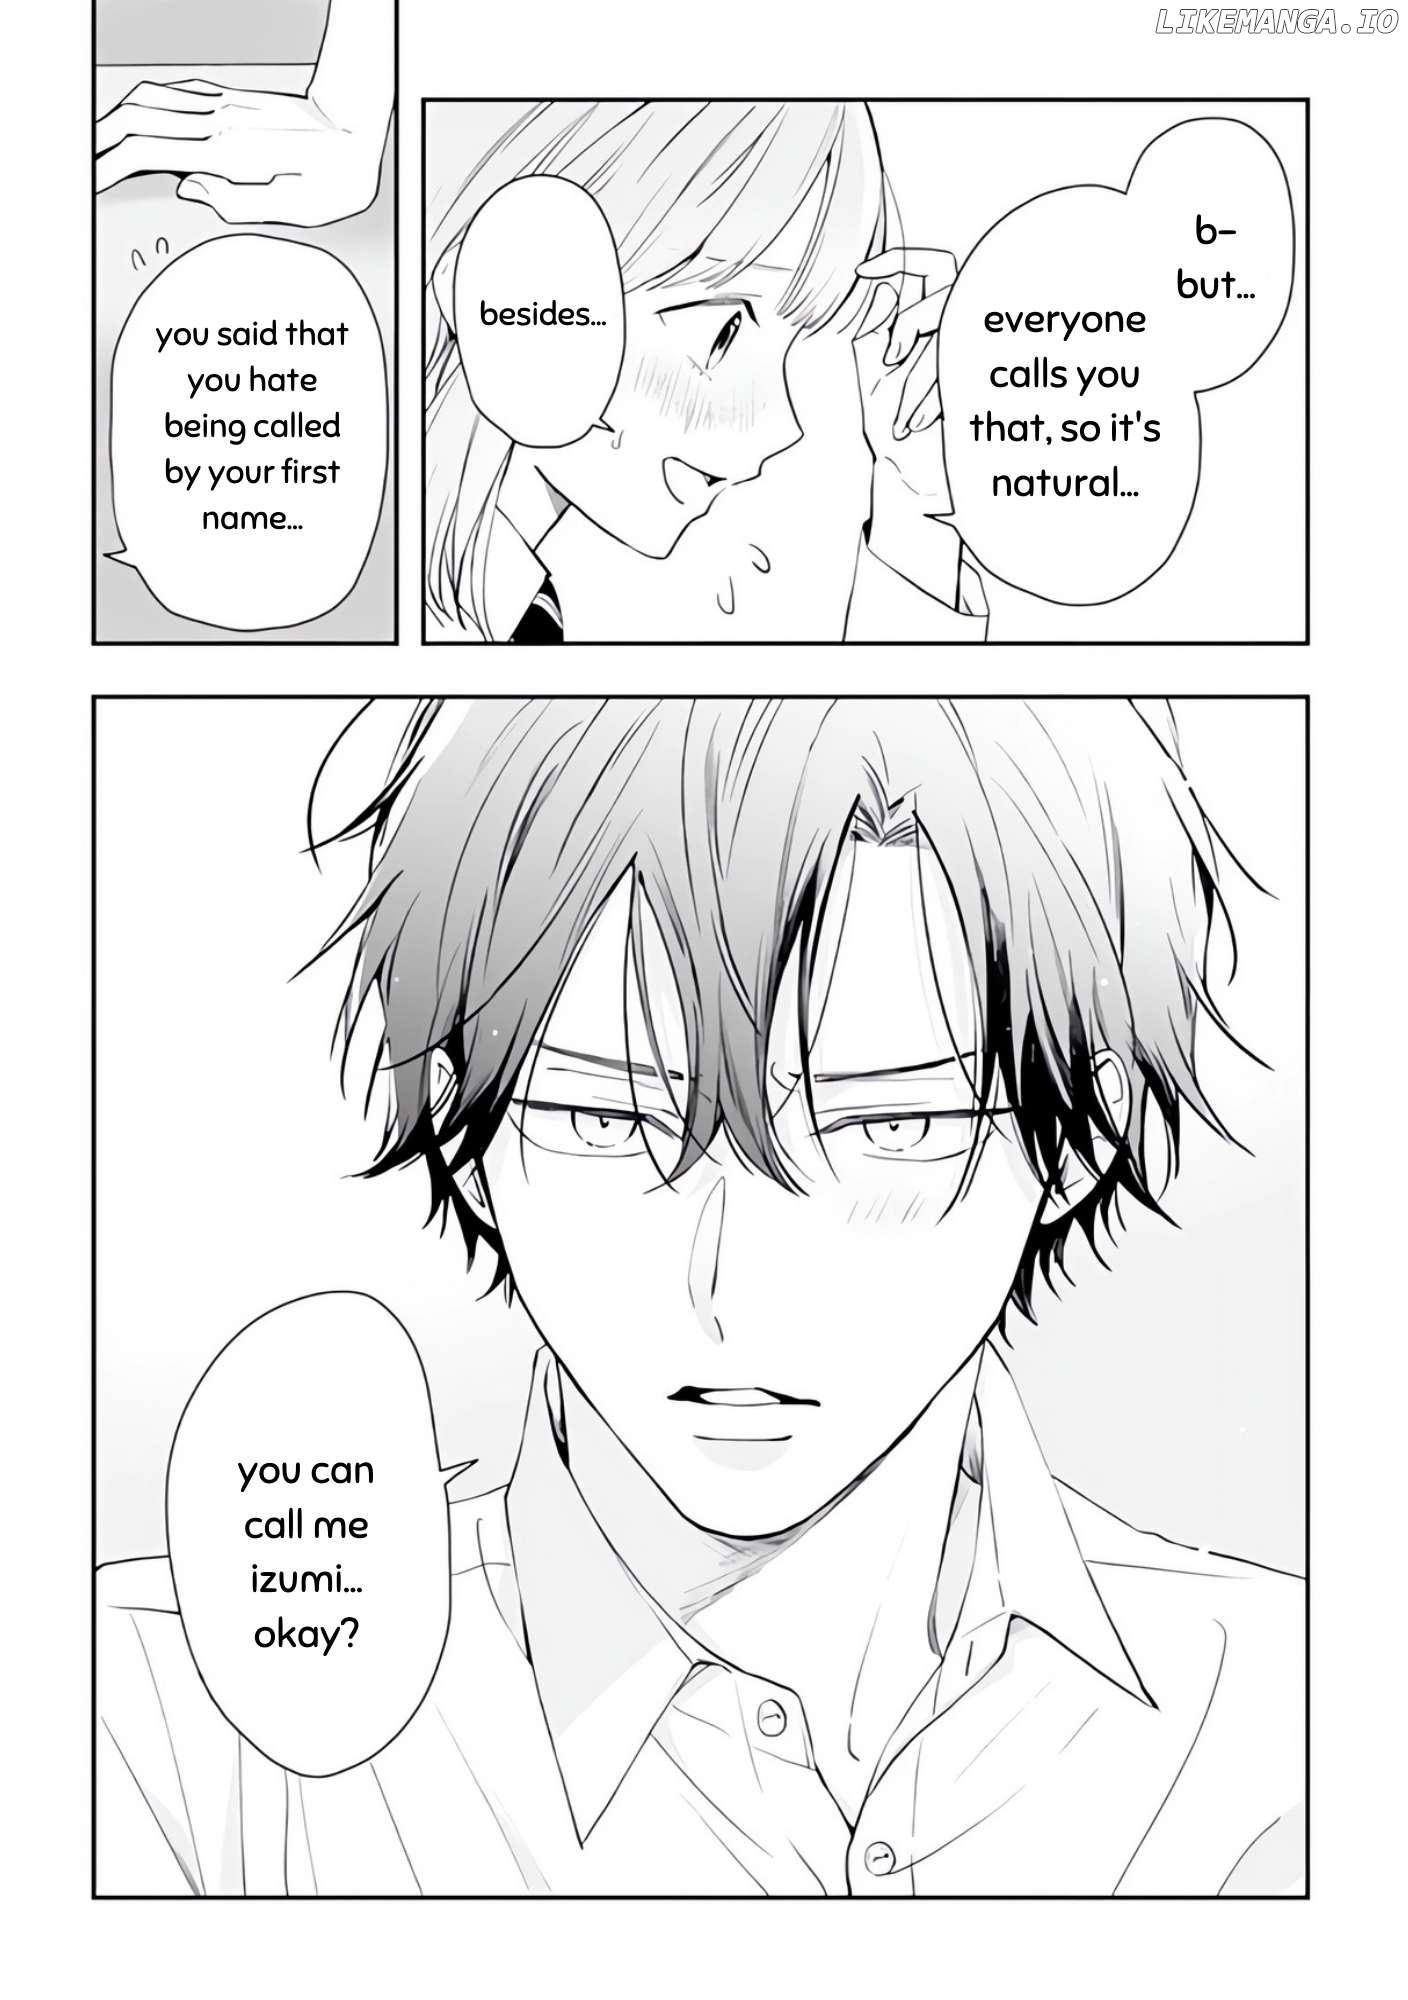 Kurosaki Wants Me All to Himself ~The Intense Sweetness of First Love~ Chapter 7.3 - page 5